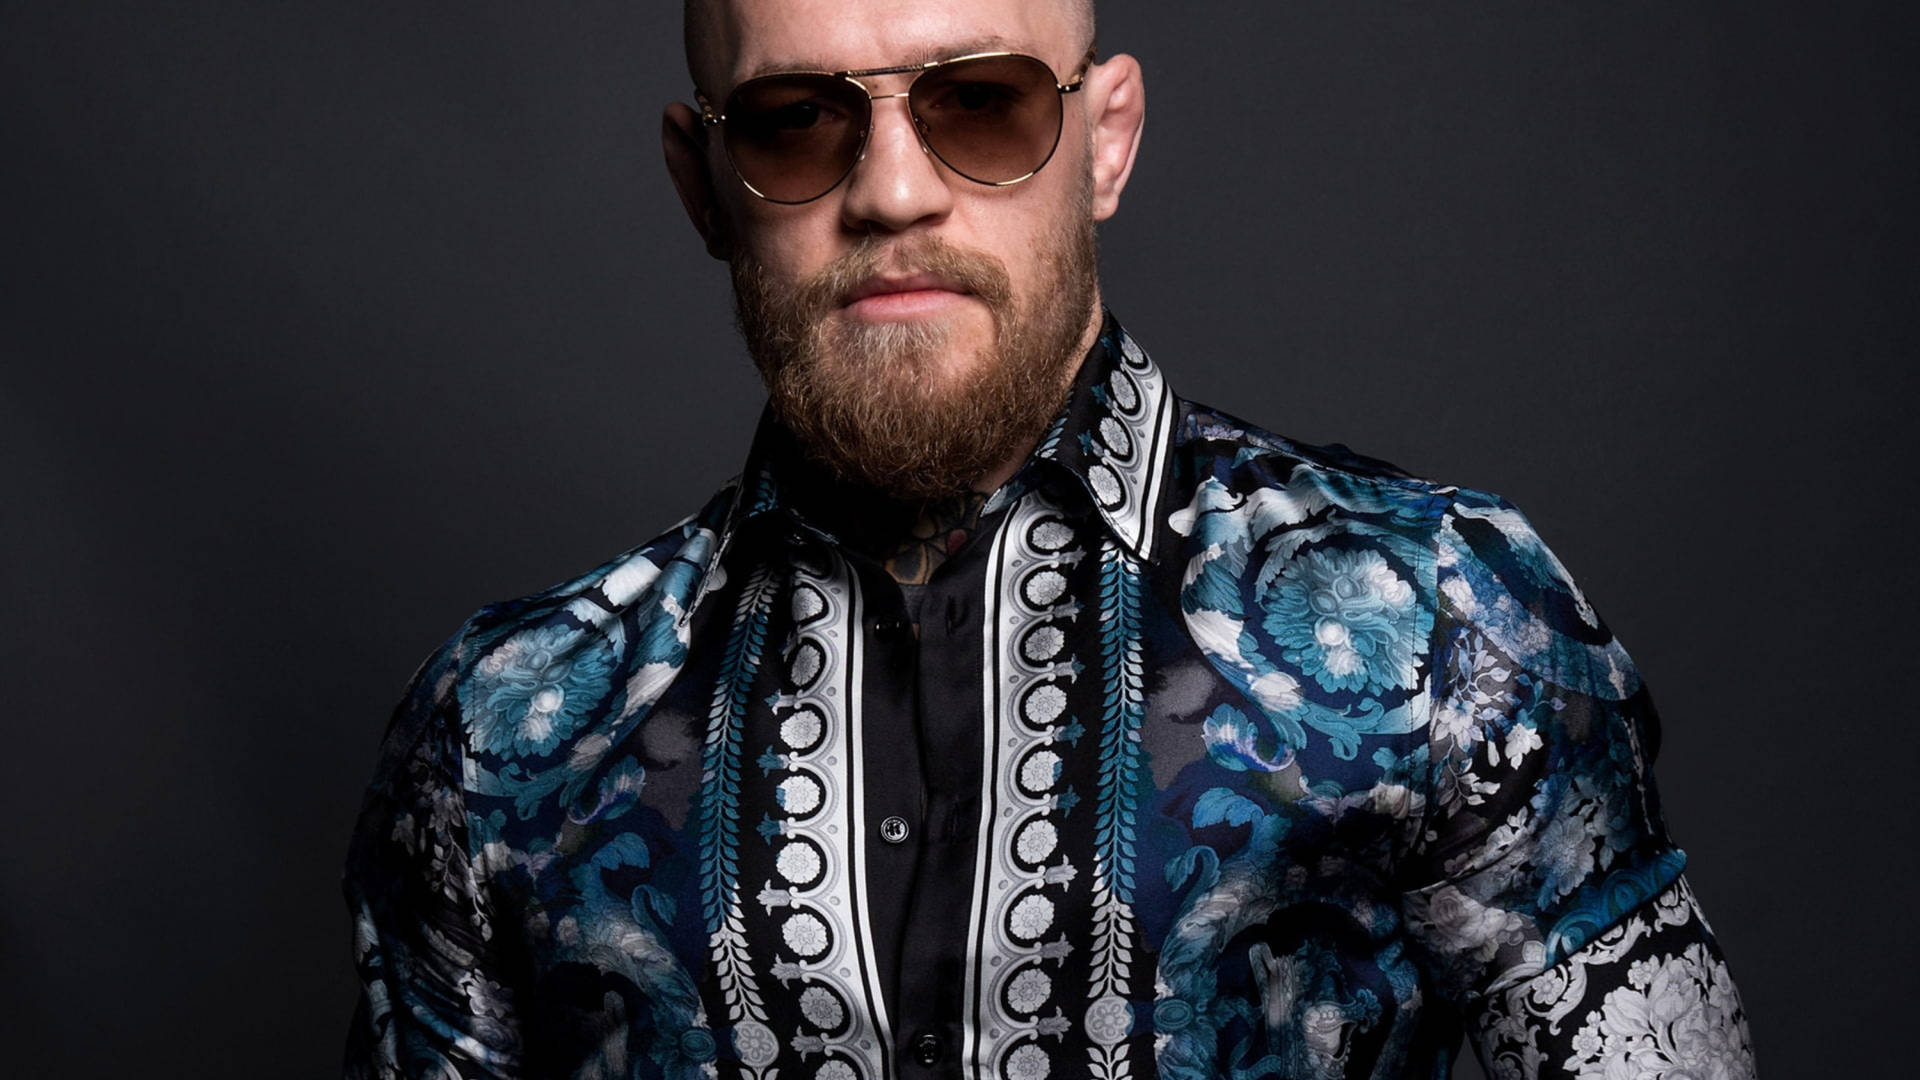 Conor Mcgregor 2560X1440 Wallpaper and Background Image